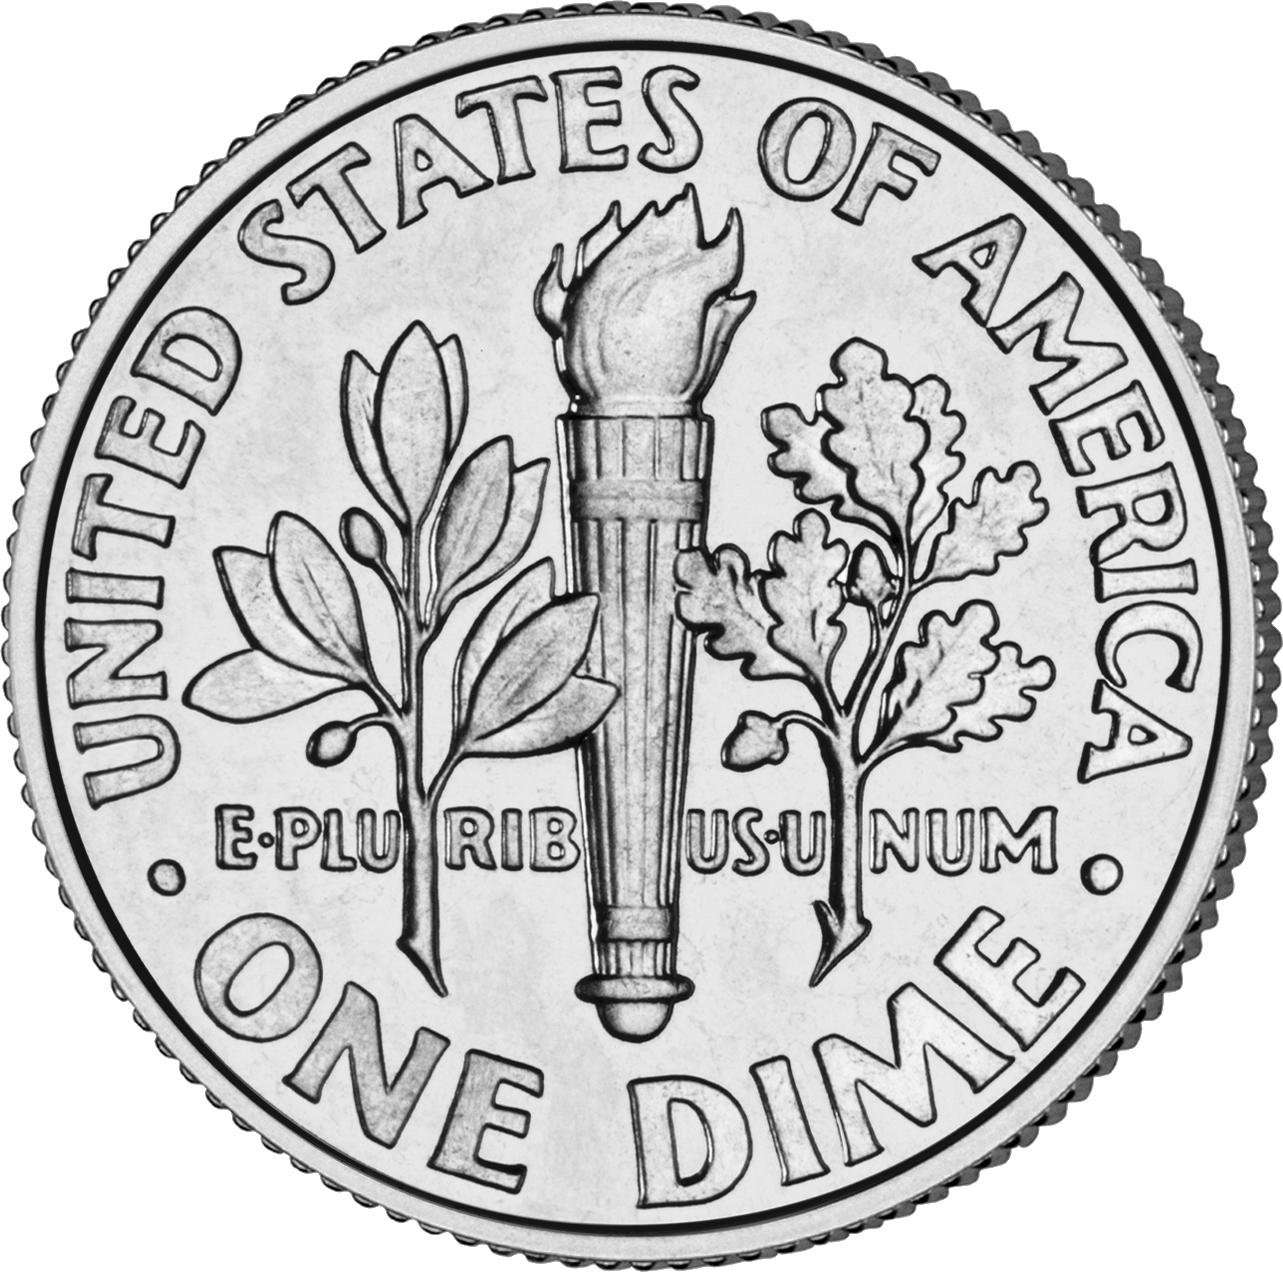 USD 10 Cent Coin Collecting Wiki